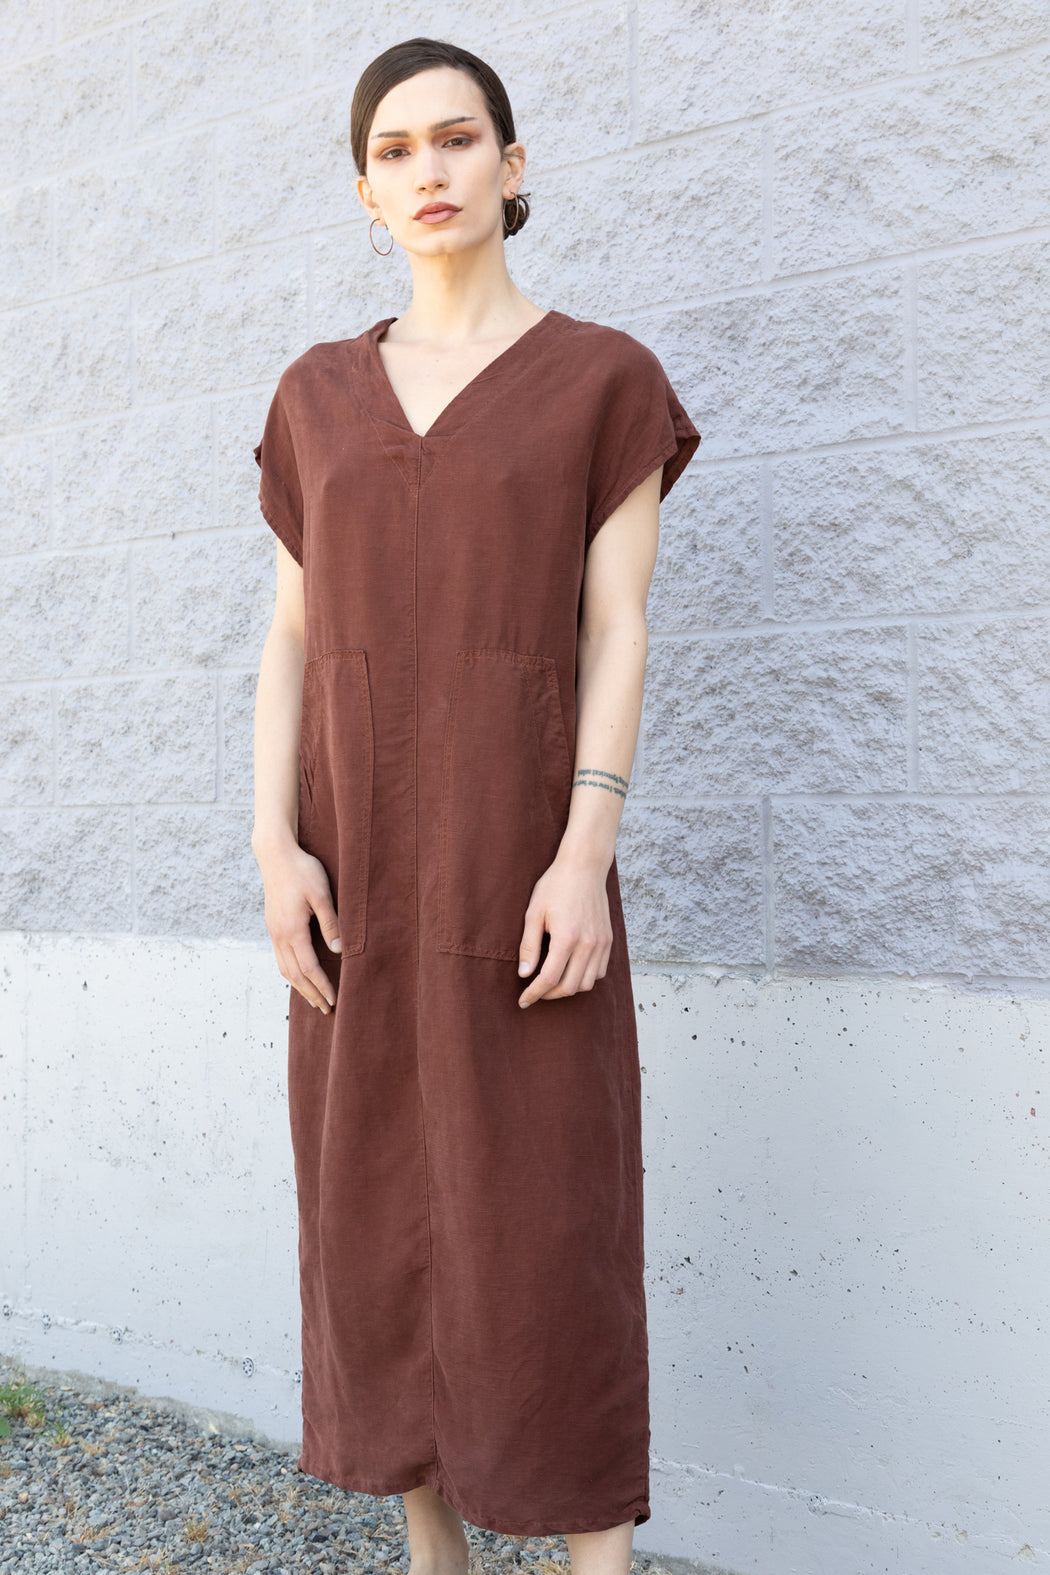 Photo of a long minimalistic dress in cinnamon brown that functions made of soft Tencel linen, sleeveless with two large patch pockets on the front and a vented back.